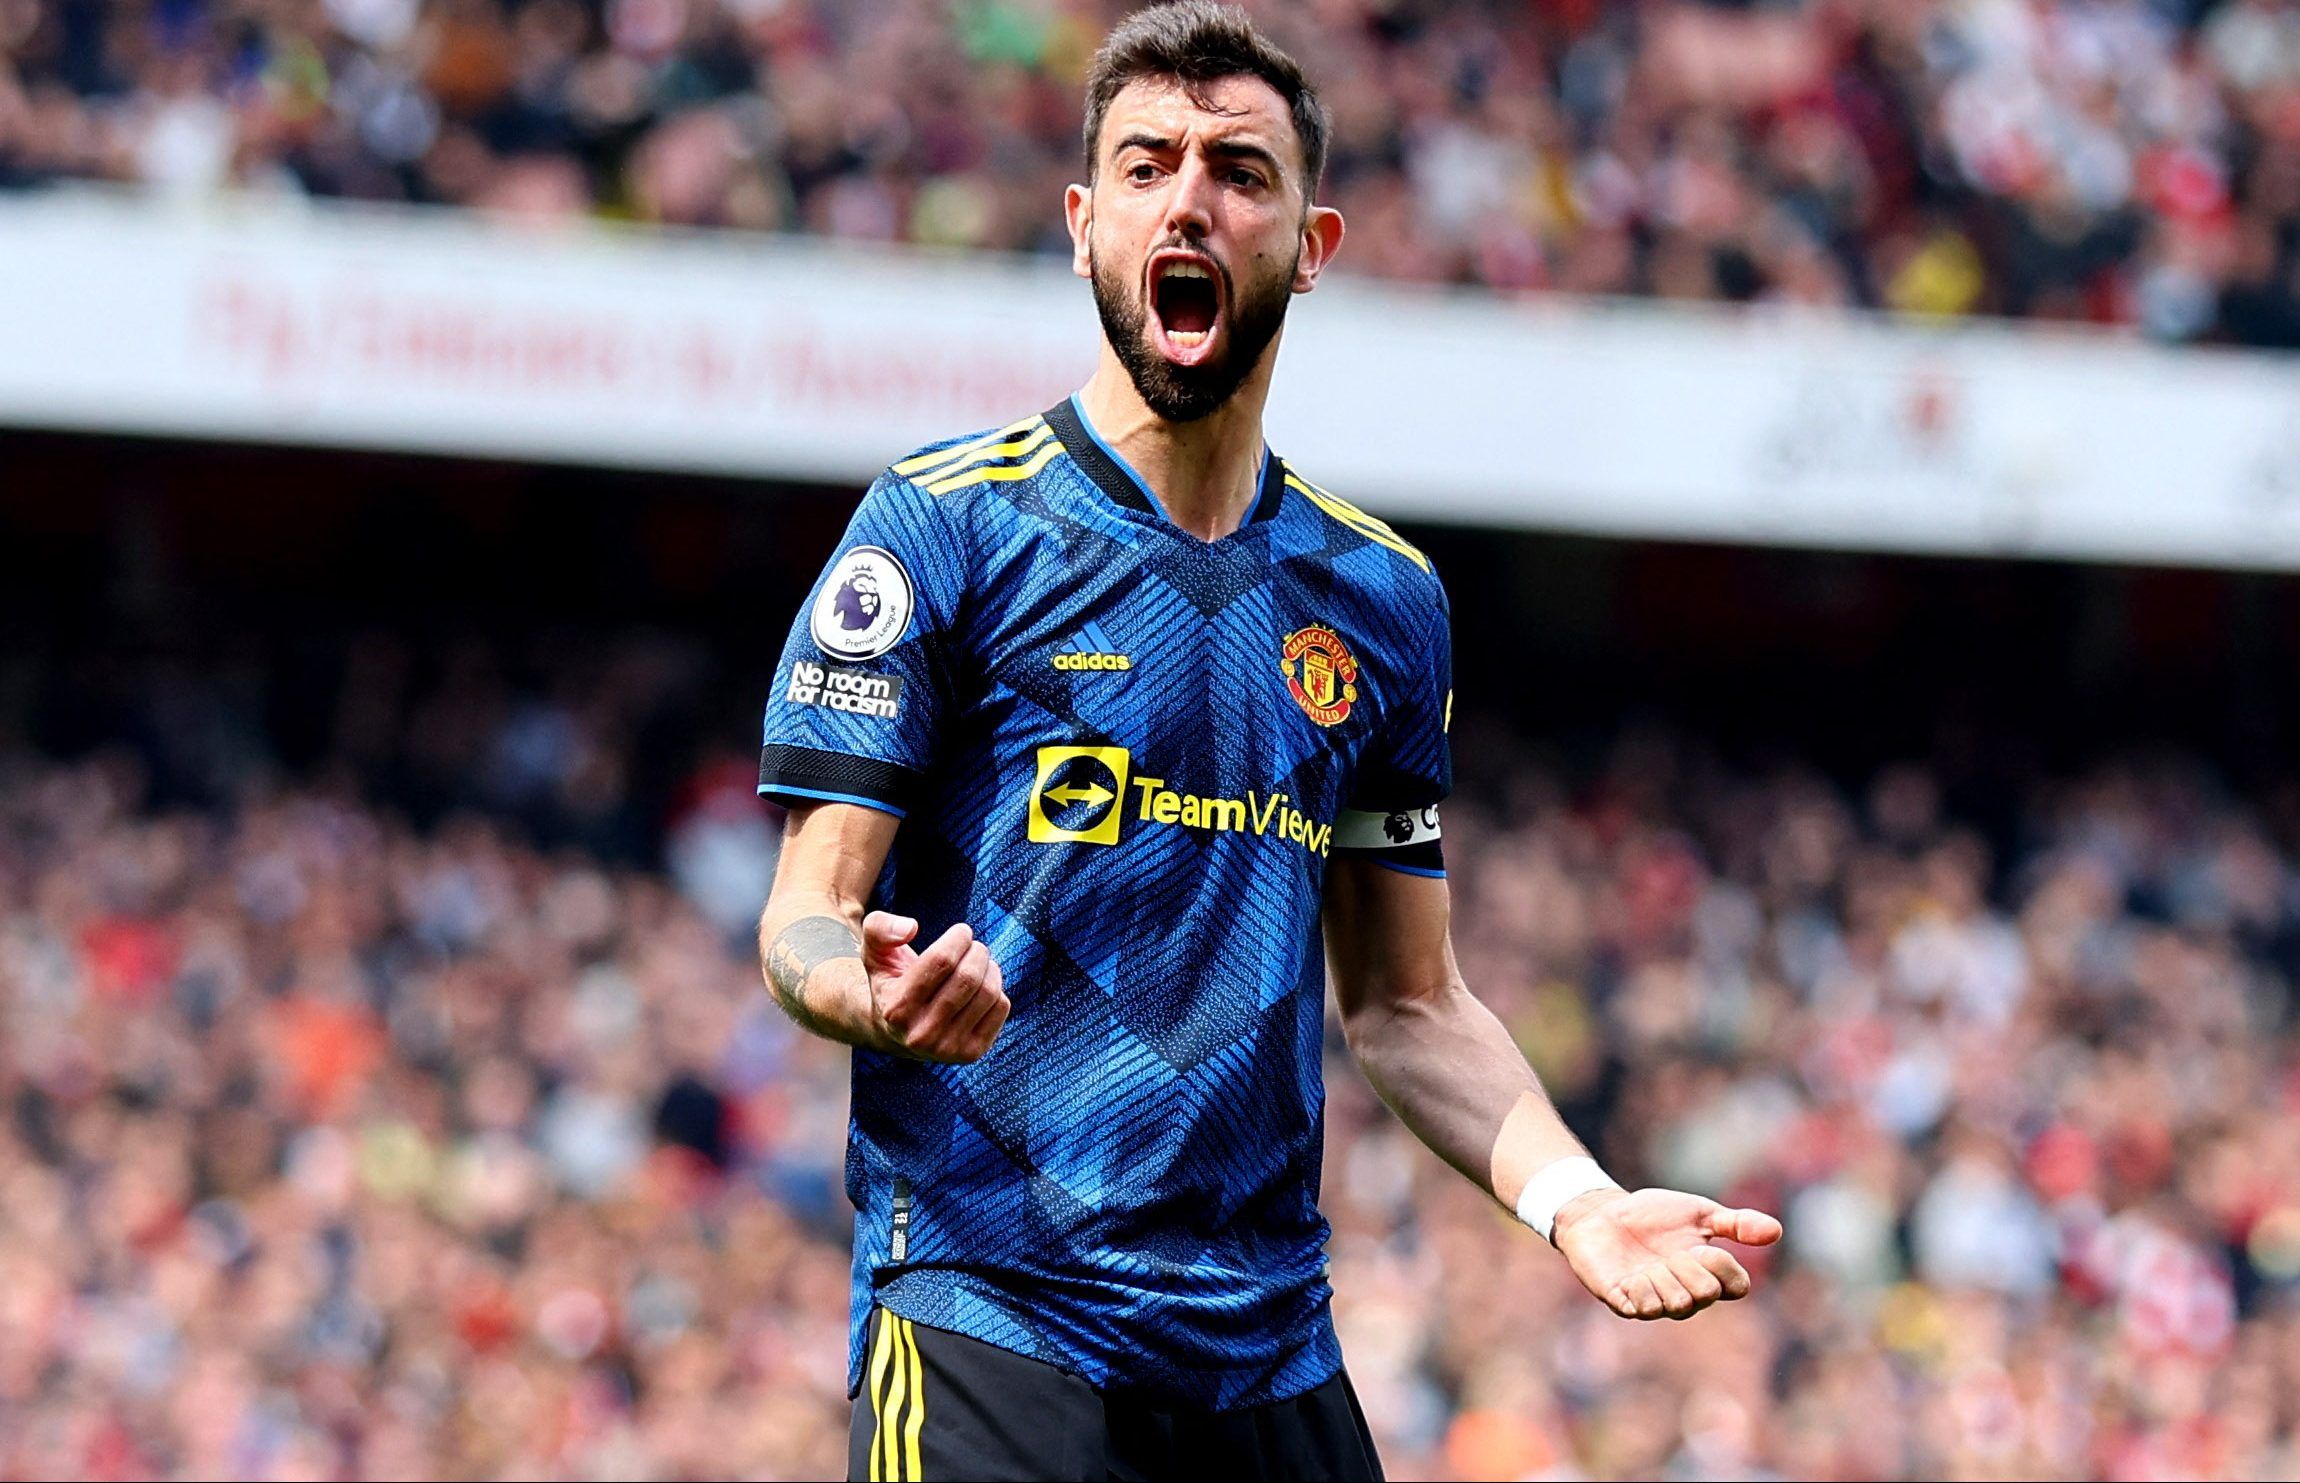 Premier League, Manchester United, Bruno Fernandes, MUFC performance in numbers, MUFC news, MUFC latest, MUFC update, Man United update, Man United news, Arsenal vs Manchester United